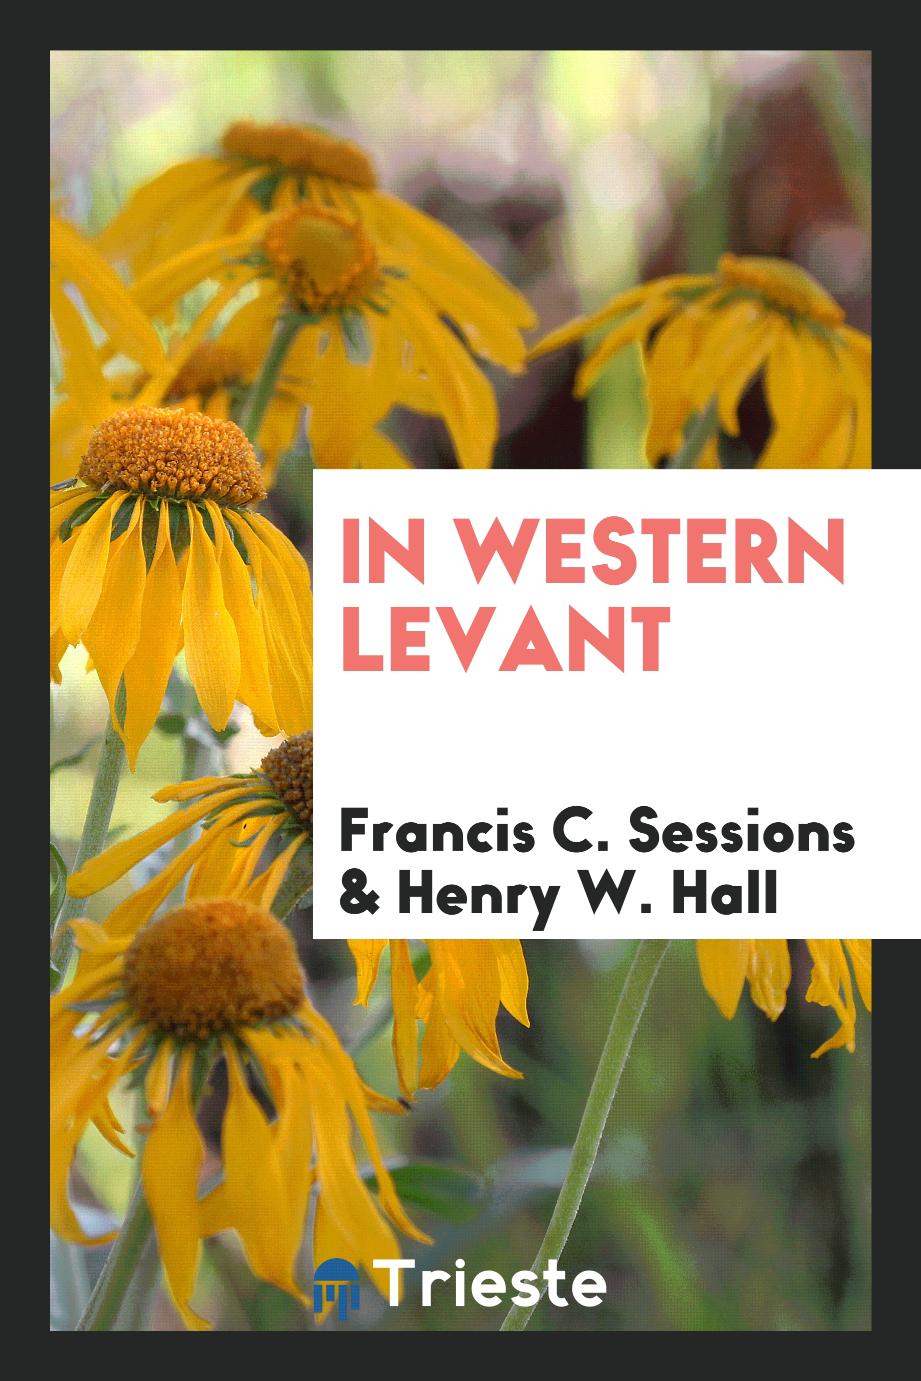 In western Levant